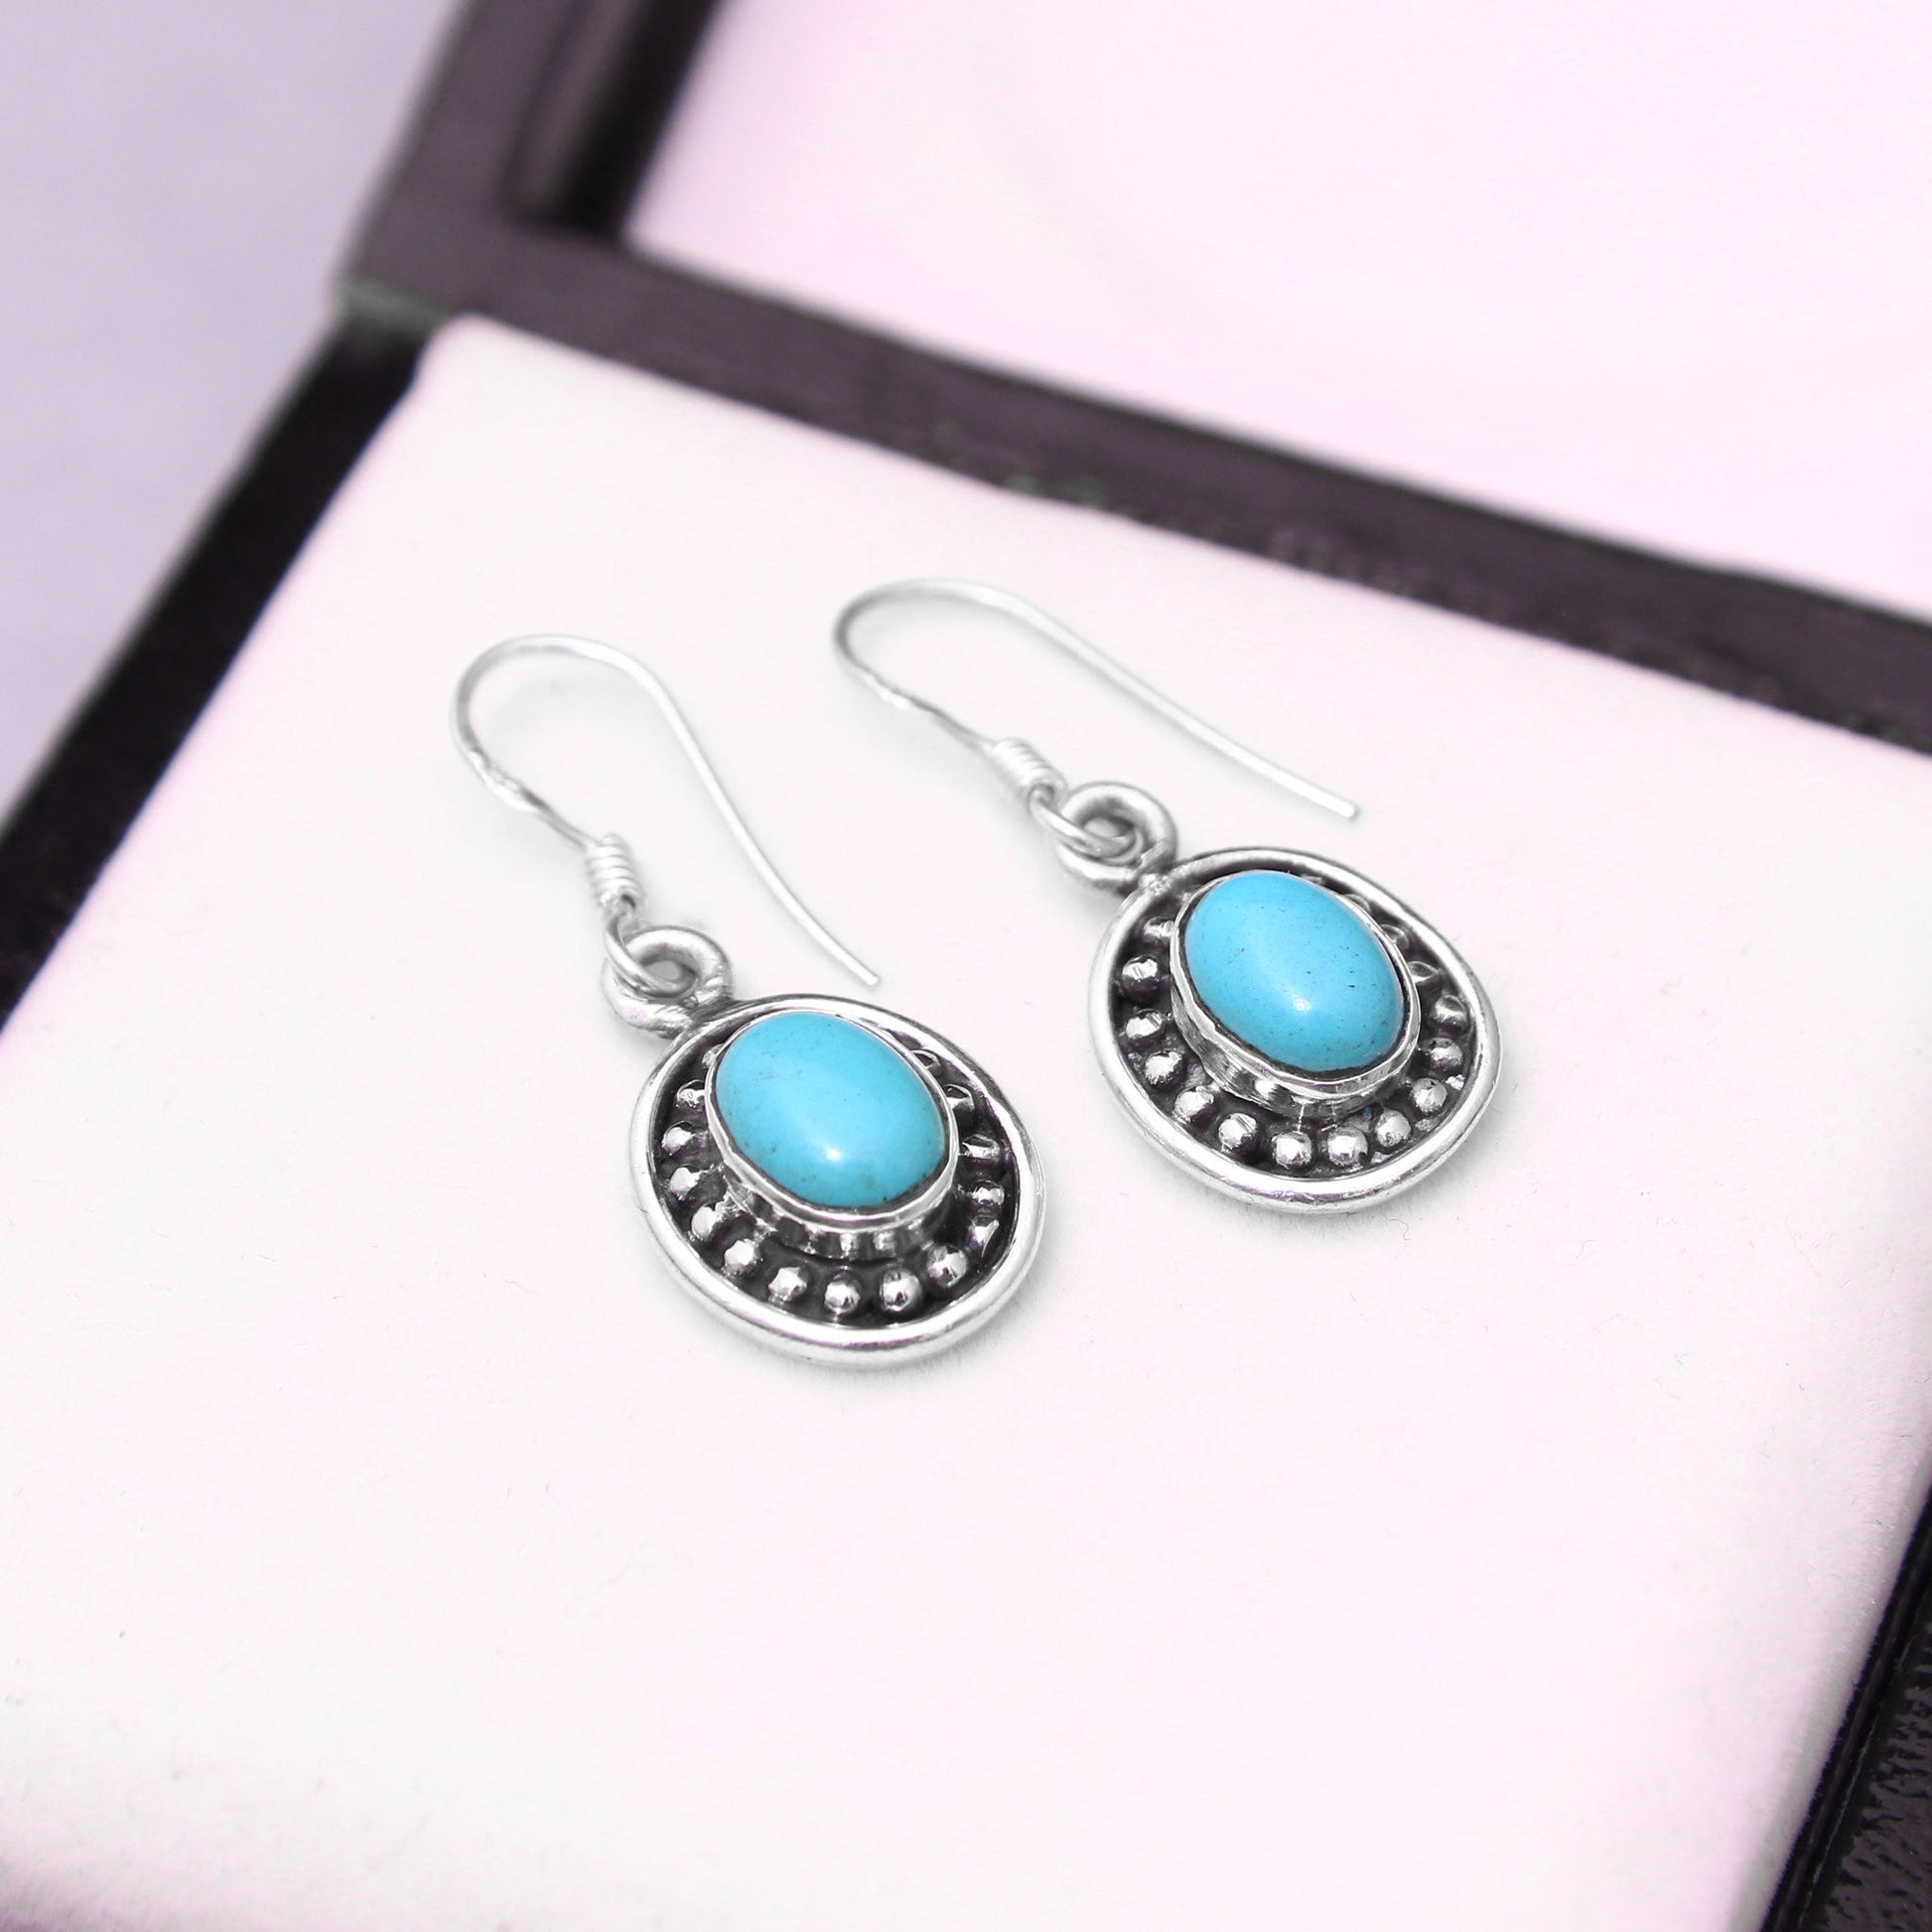 Charming Turquoise Silver Dangle Earring - Every Occasion Wear GemsRush